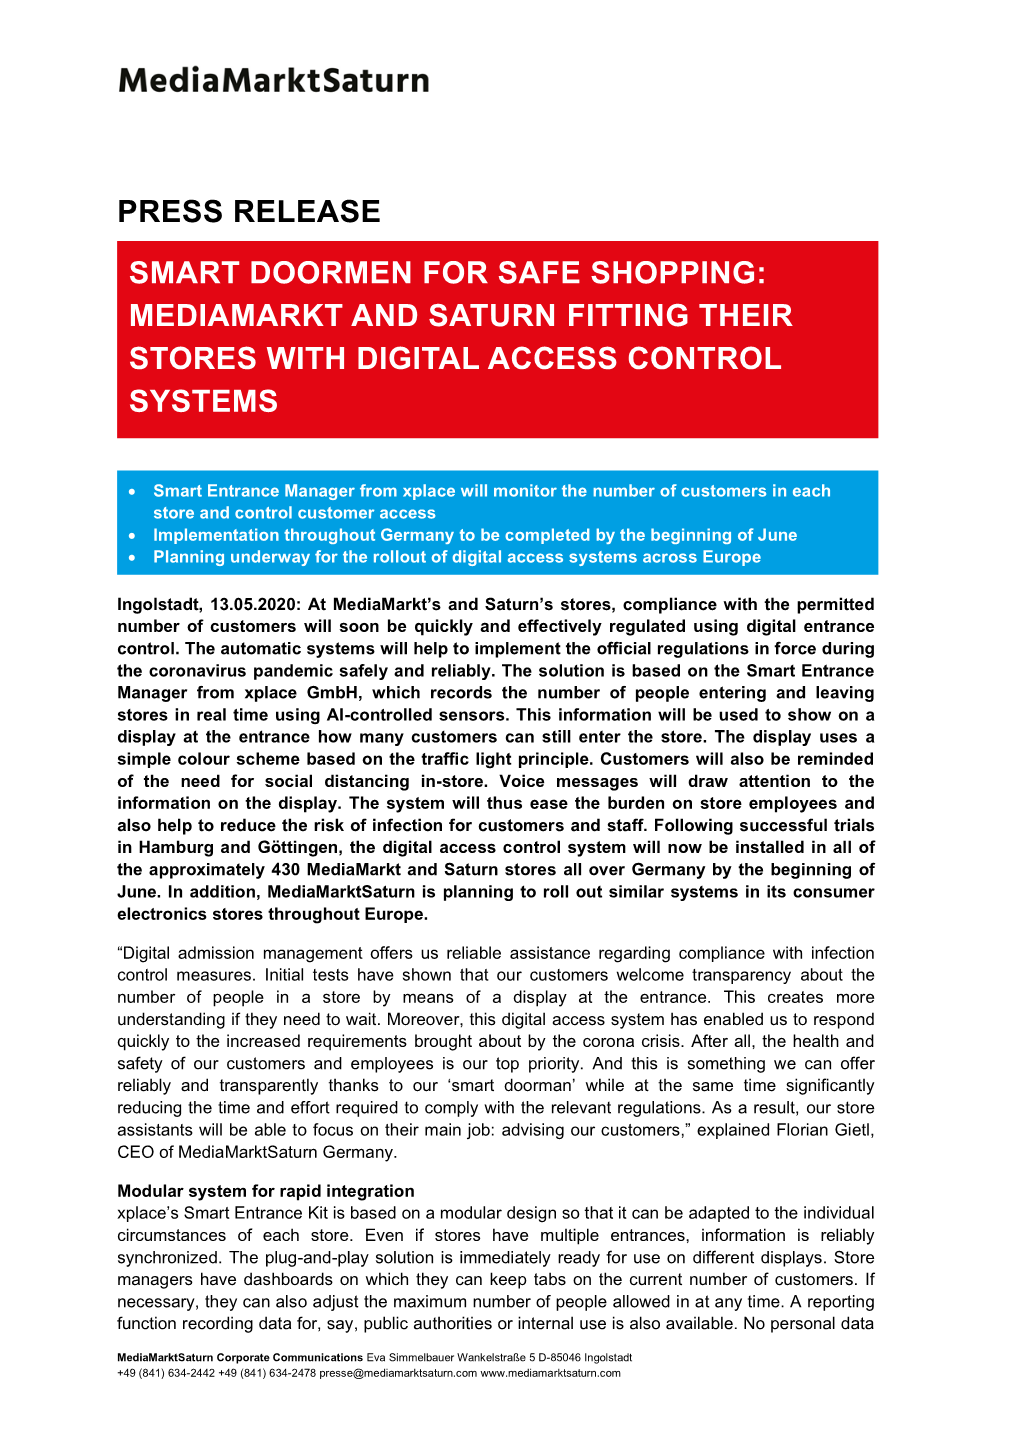 Press Release Smart Doormen for Safe Shopping: Mediamarkt and Saturn Fitting Their Stores with Digital Access Control Systems